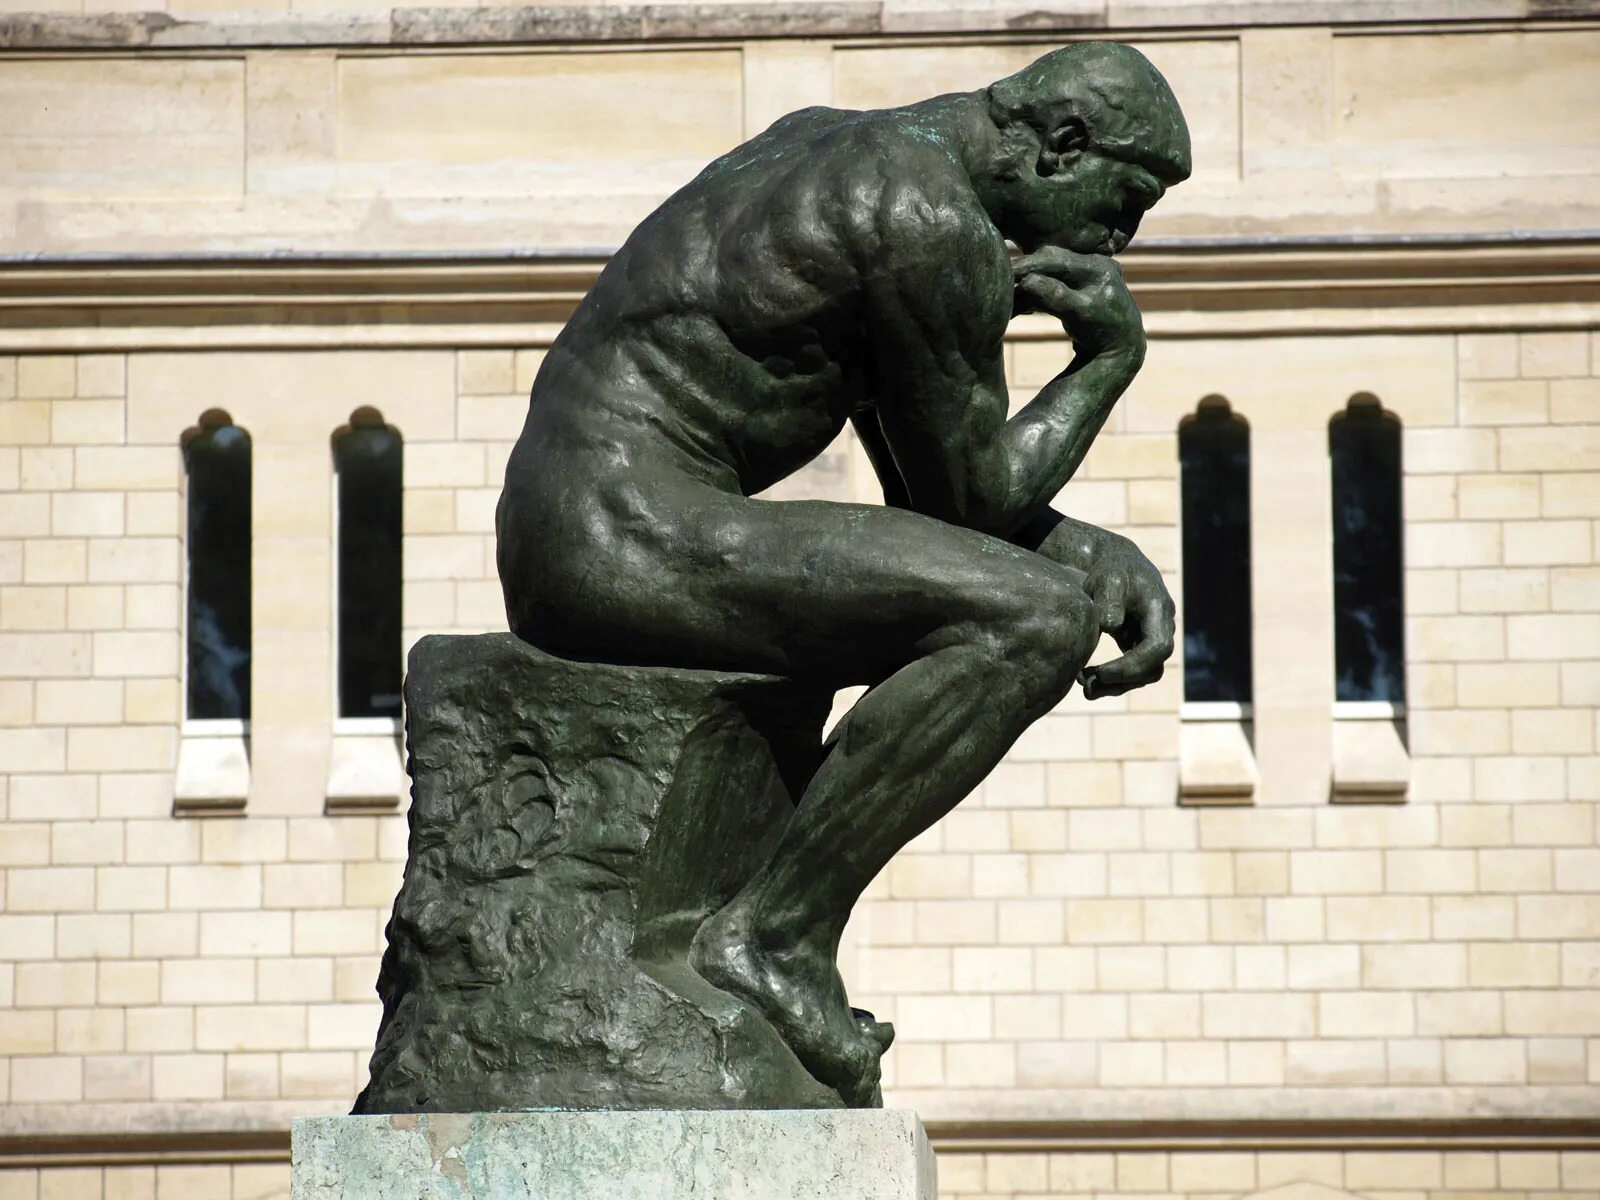 What Was The Original Name Of The Auguste Rodin Sculpture “The Thinker”?